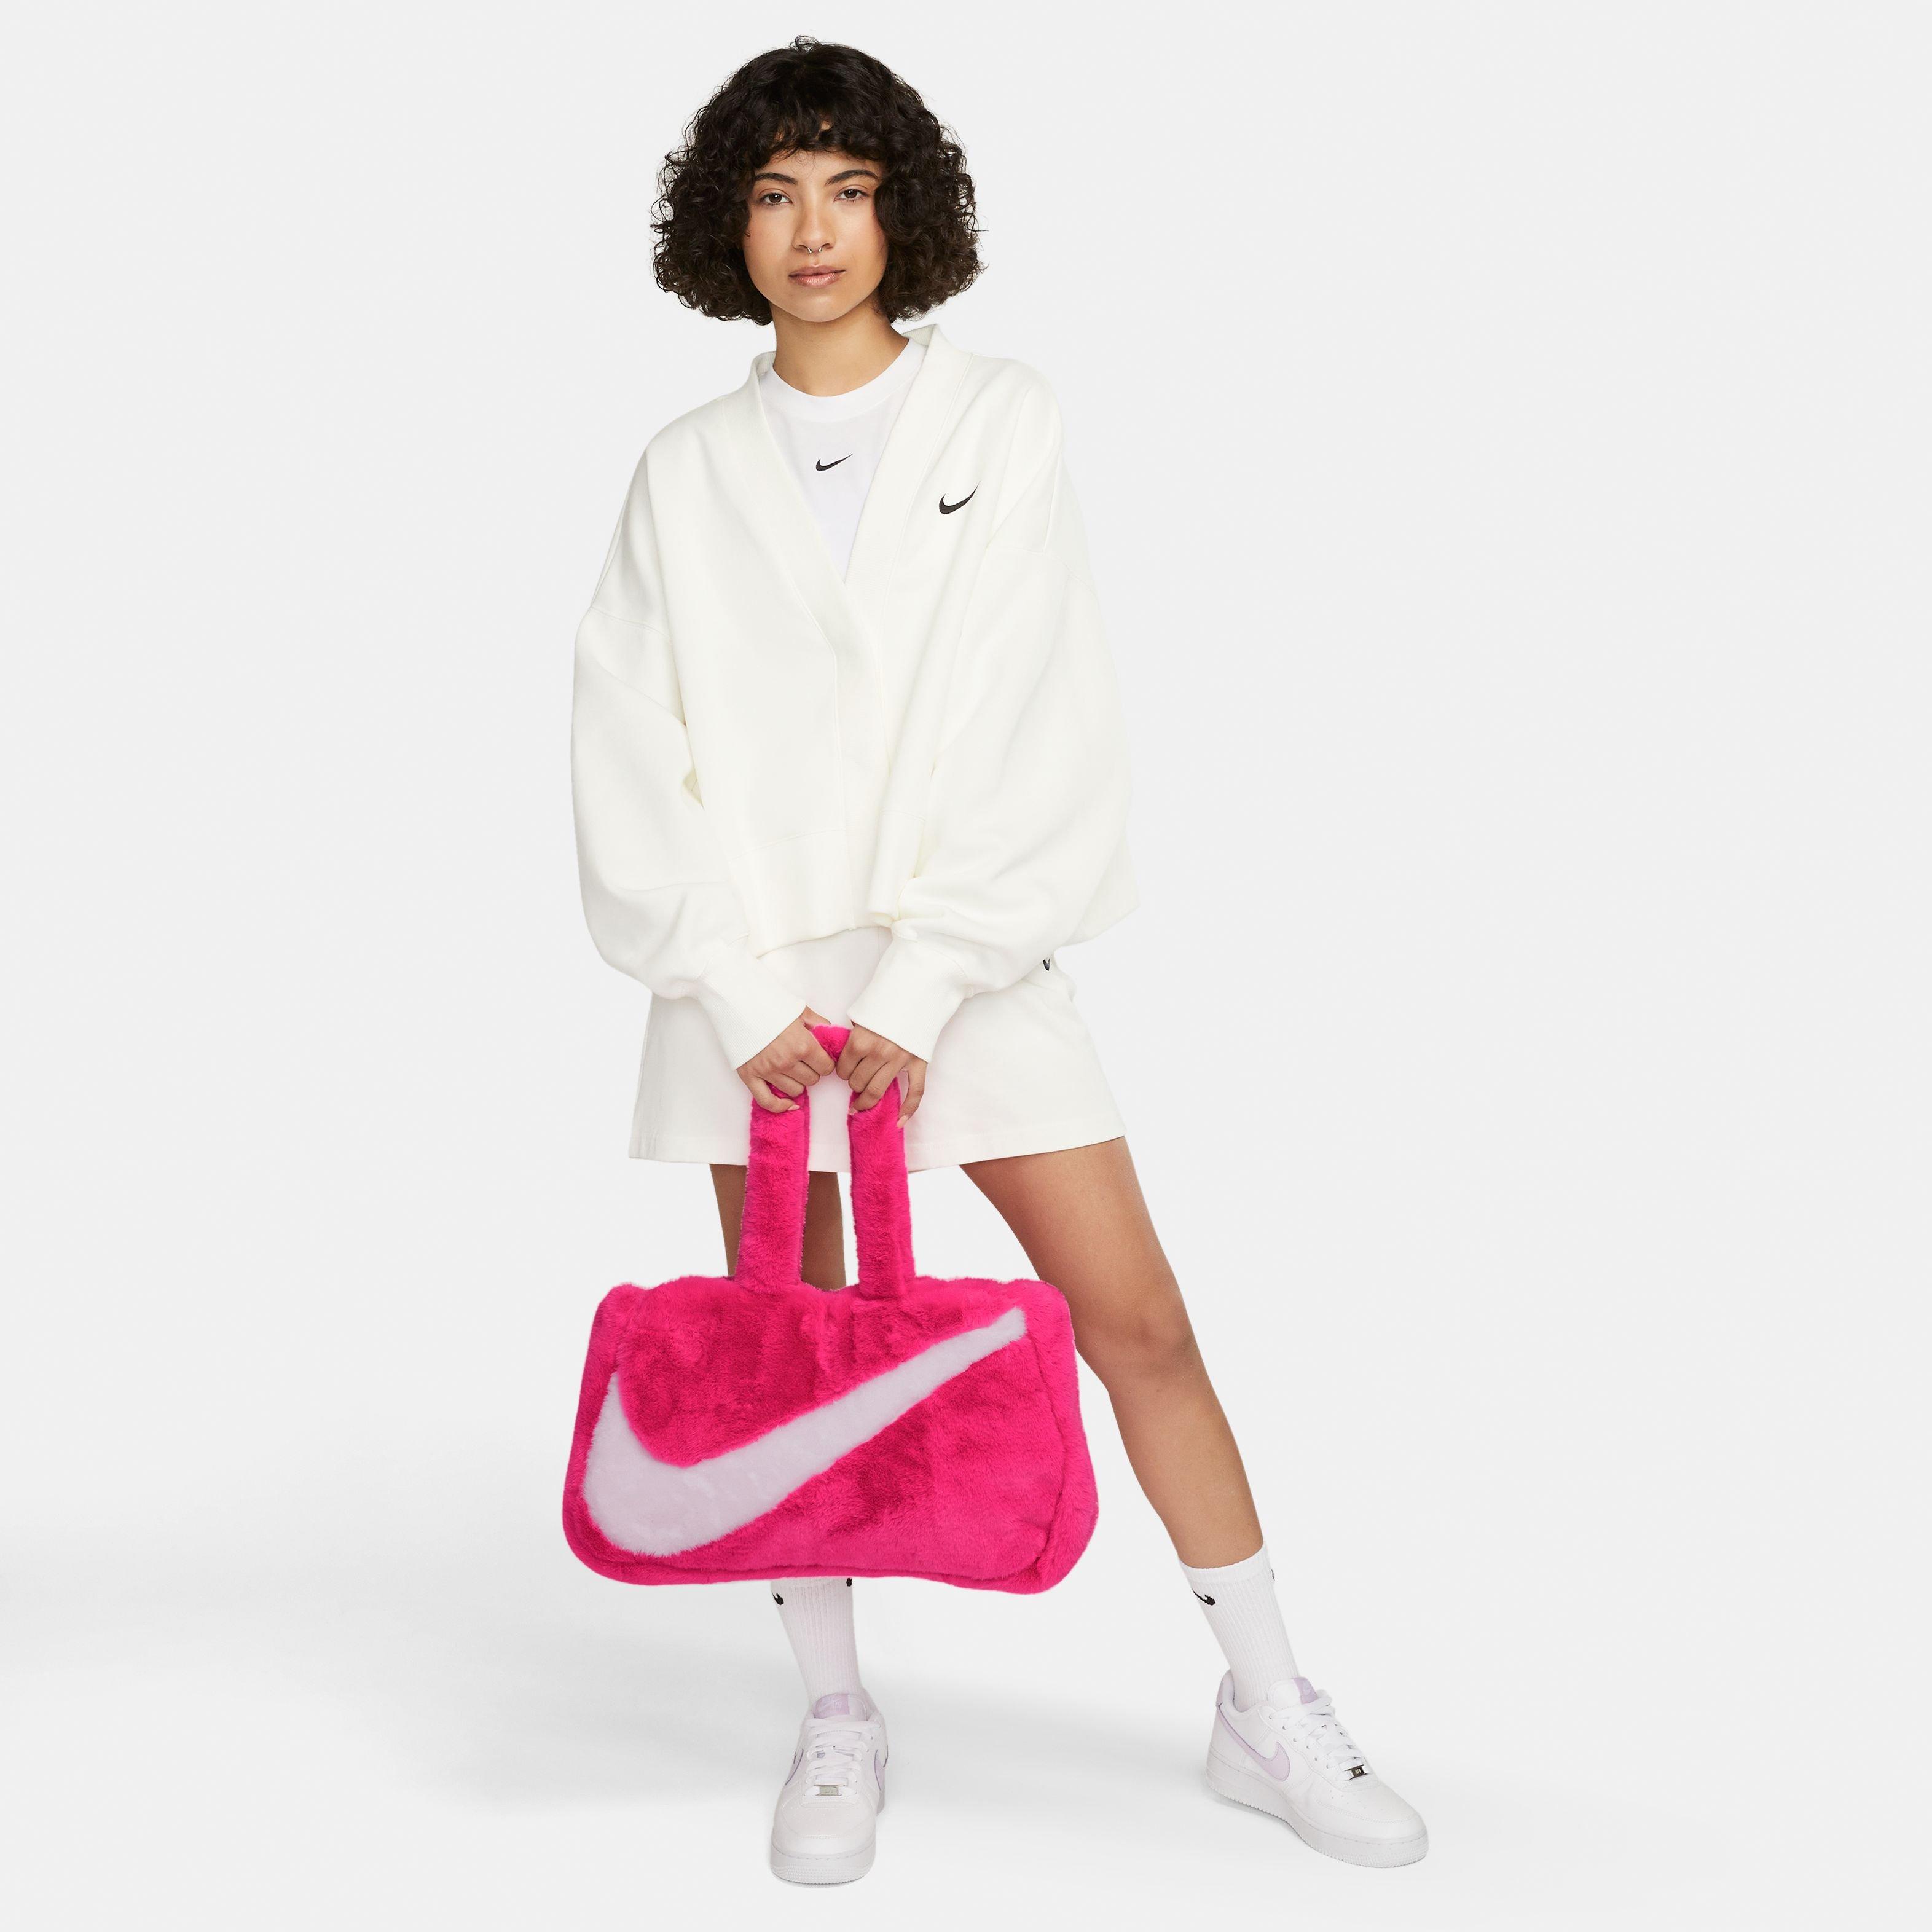 Nike Everyday Tote Bags